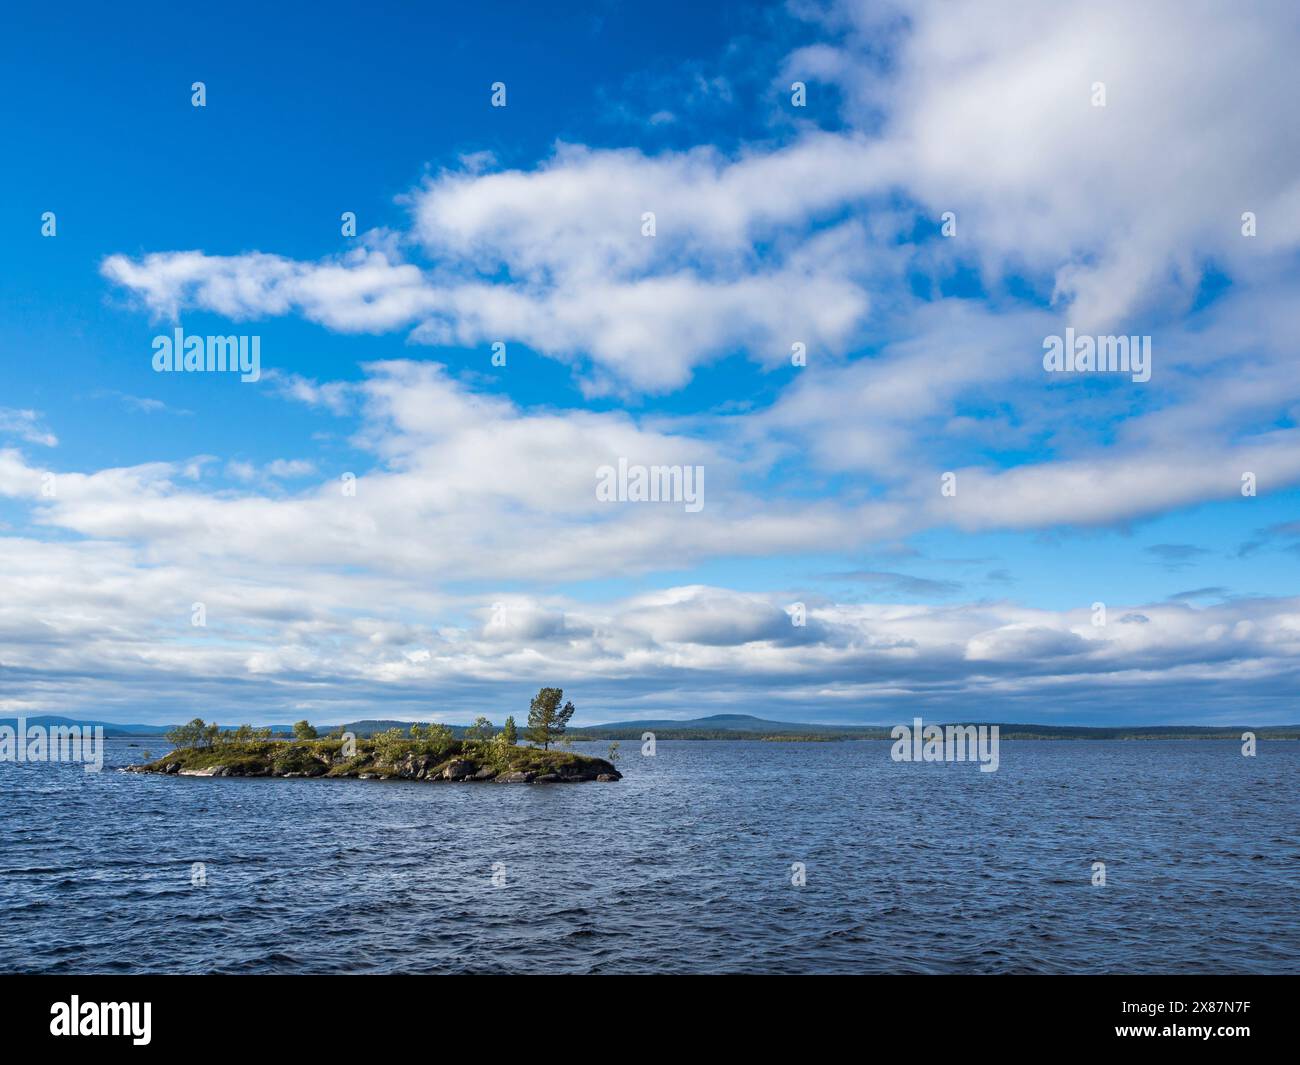 Finland, Lapland, Clouds over islet in lake Inari Stock Photo